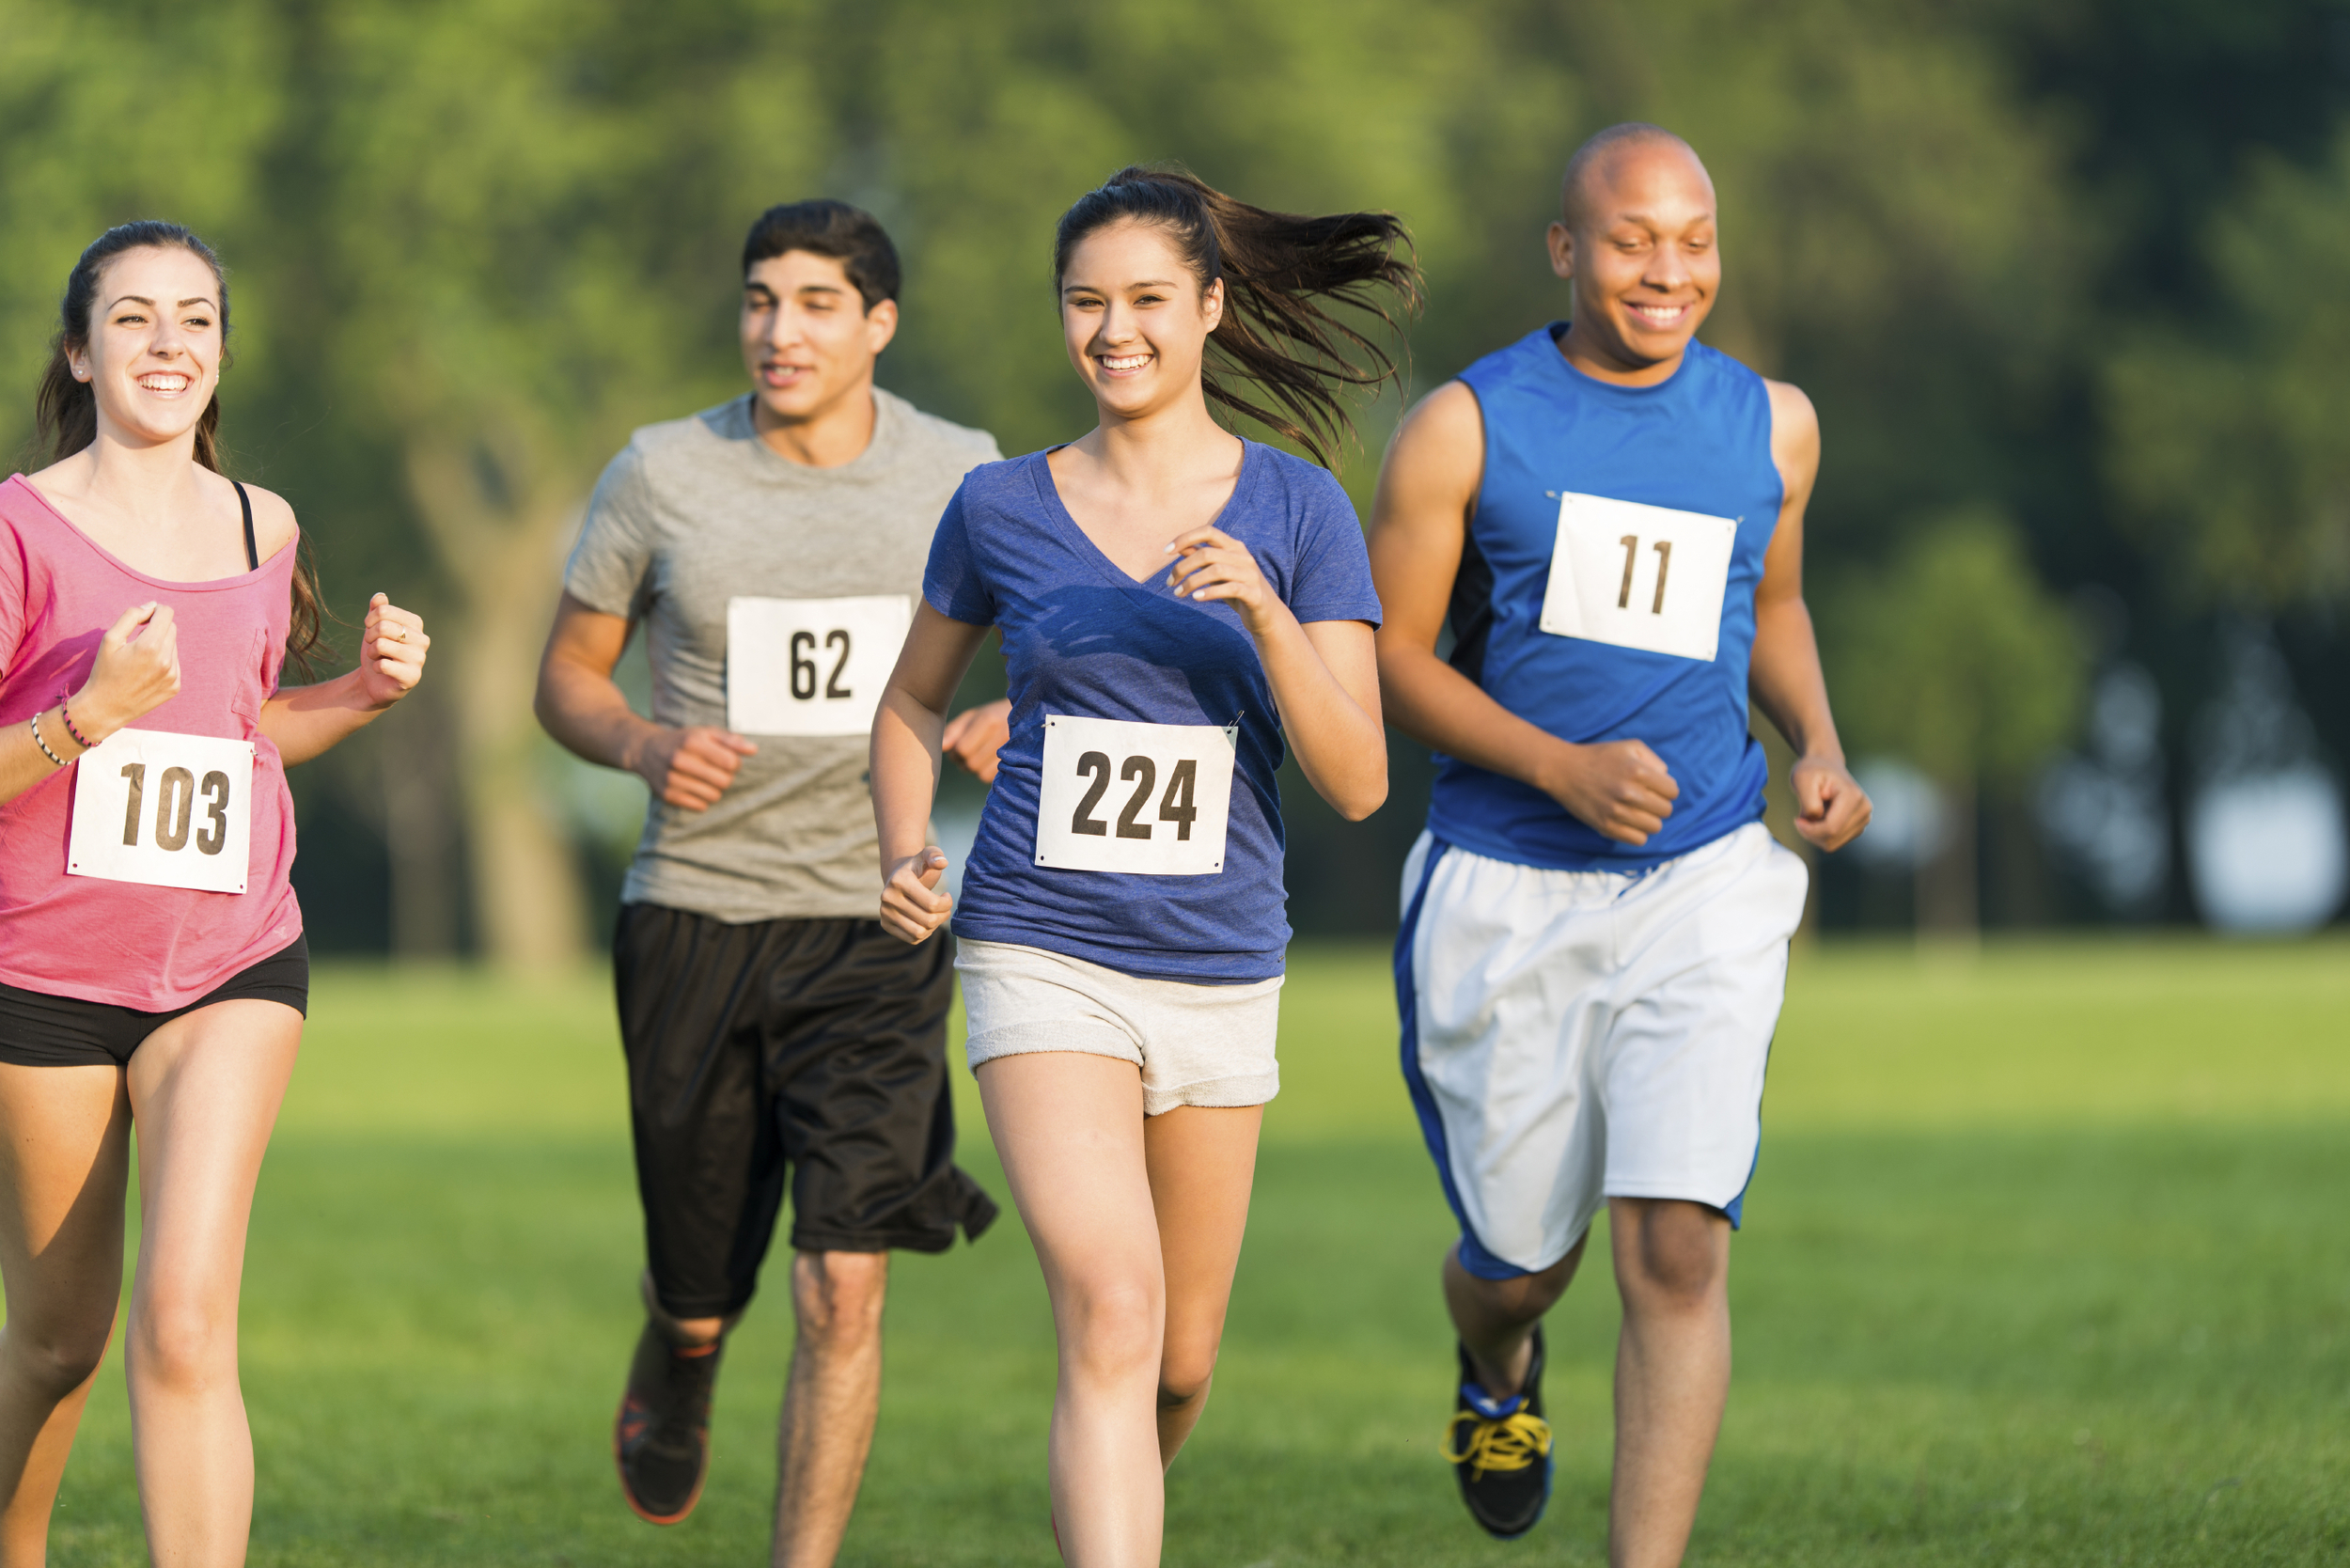   Your next walkathon requires no sweat    Learn More  